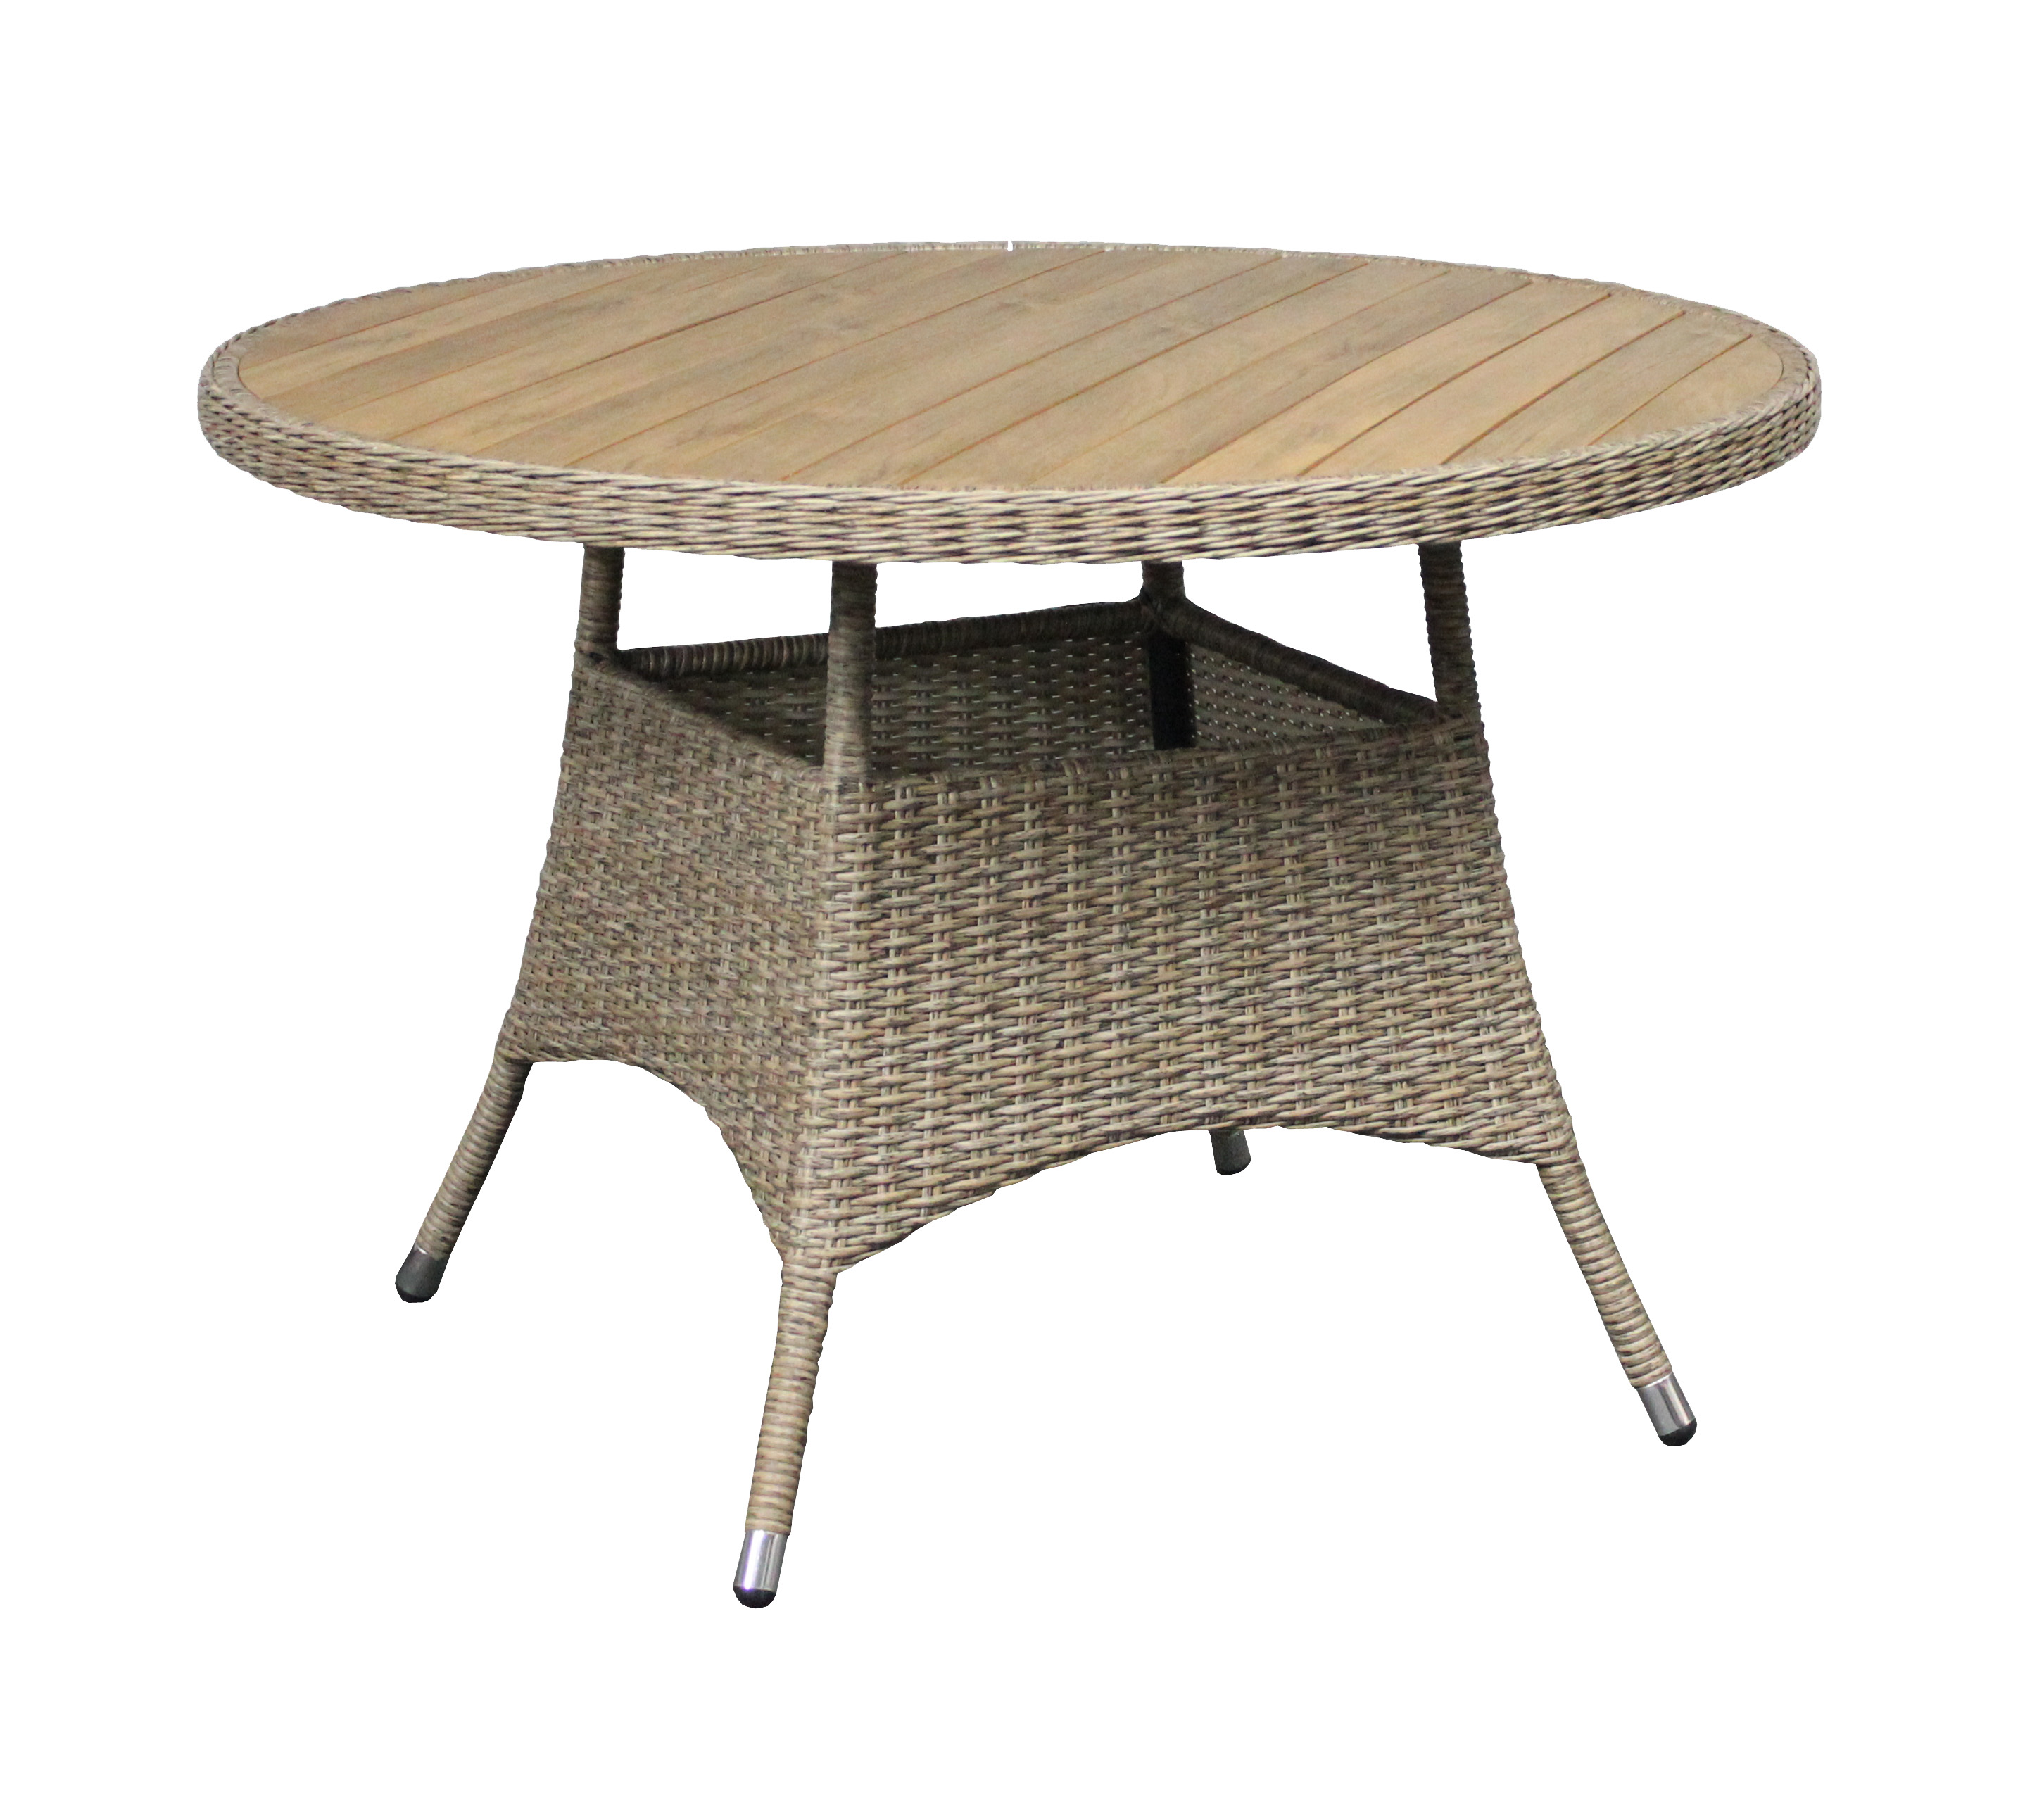 Hot Sell Good Weaving Wicker Dining Table For Outdoor garden furniture